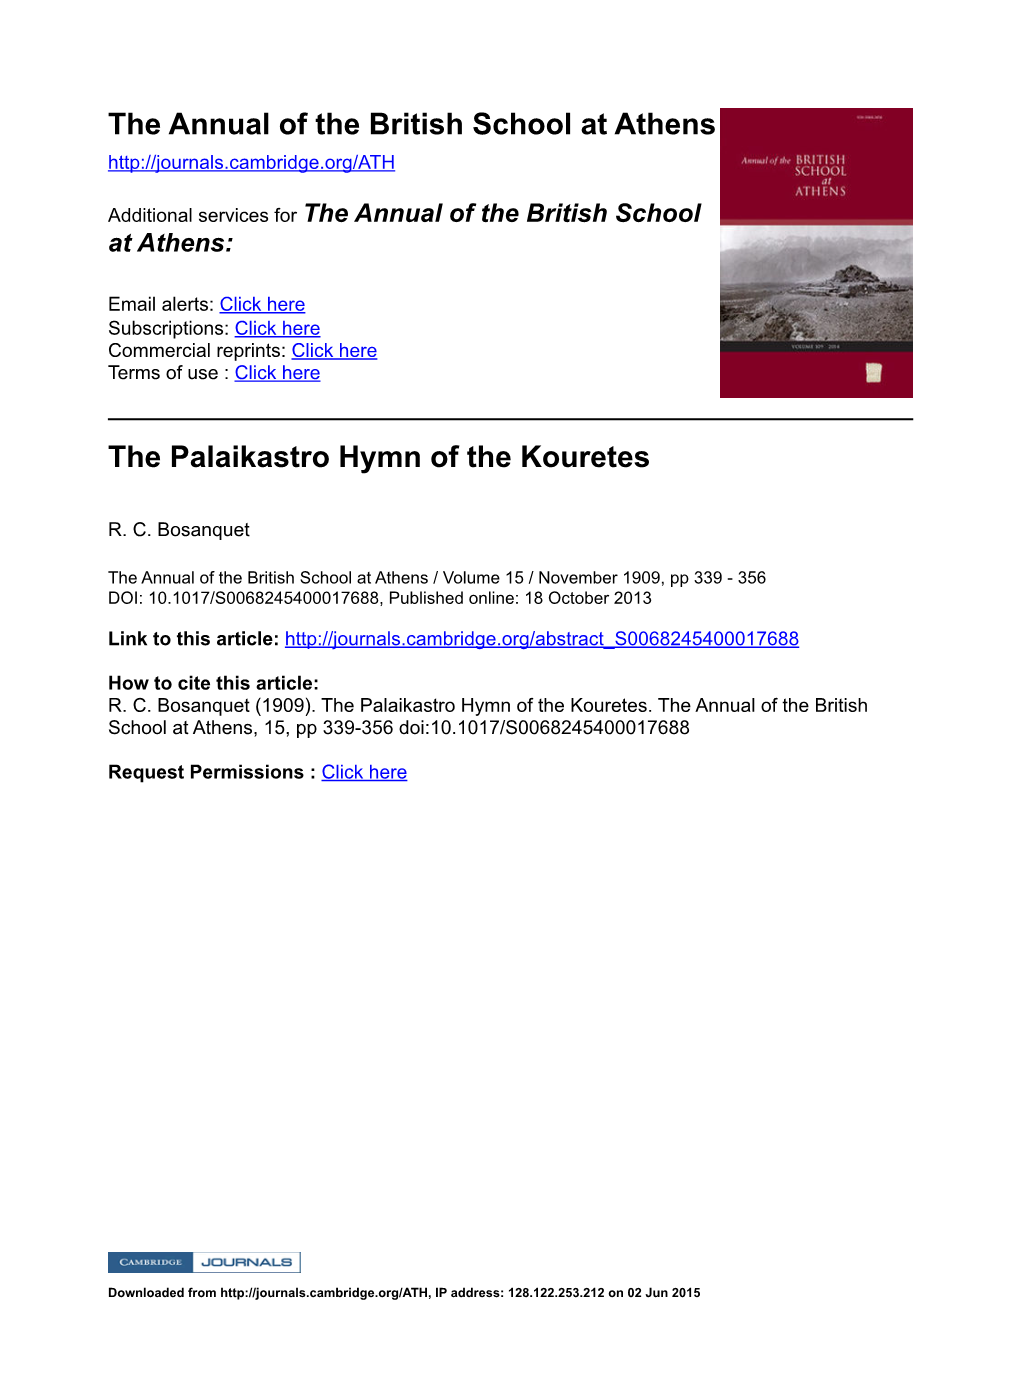 The Annual of the British School at Athens the Palaikastro Hymn of The